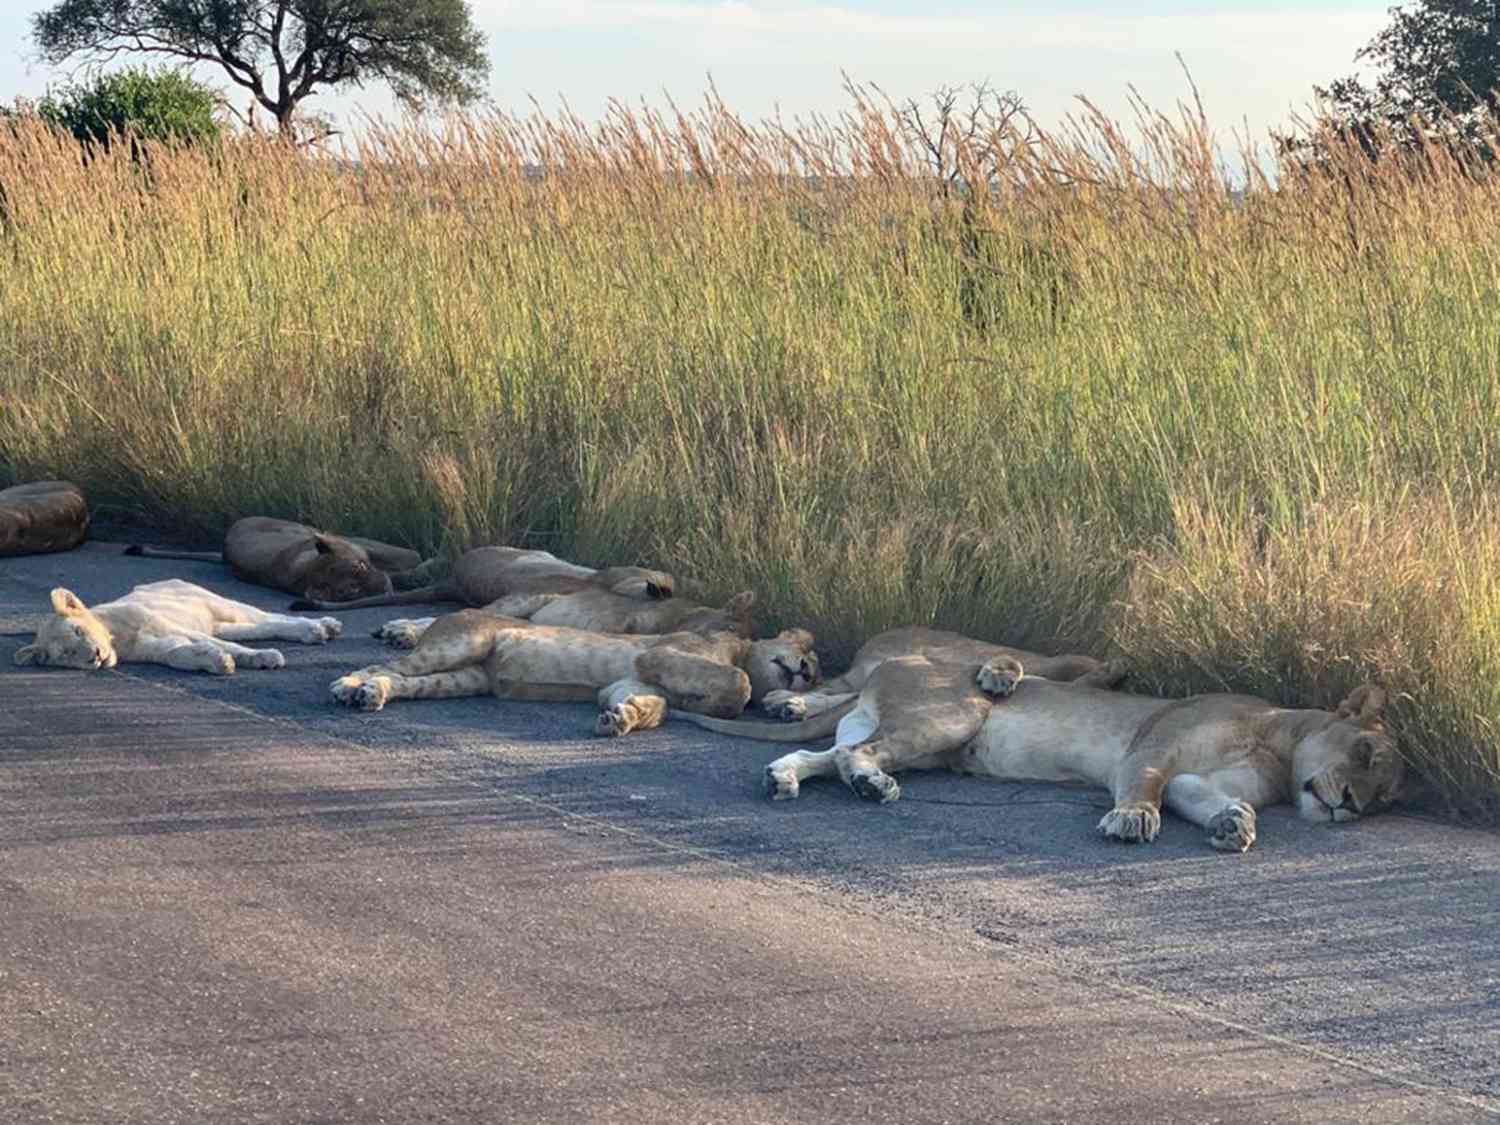 Lions Are Enjoying More Naps on the Roads of South Africa's Kruger National Park